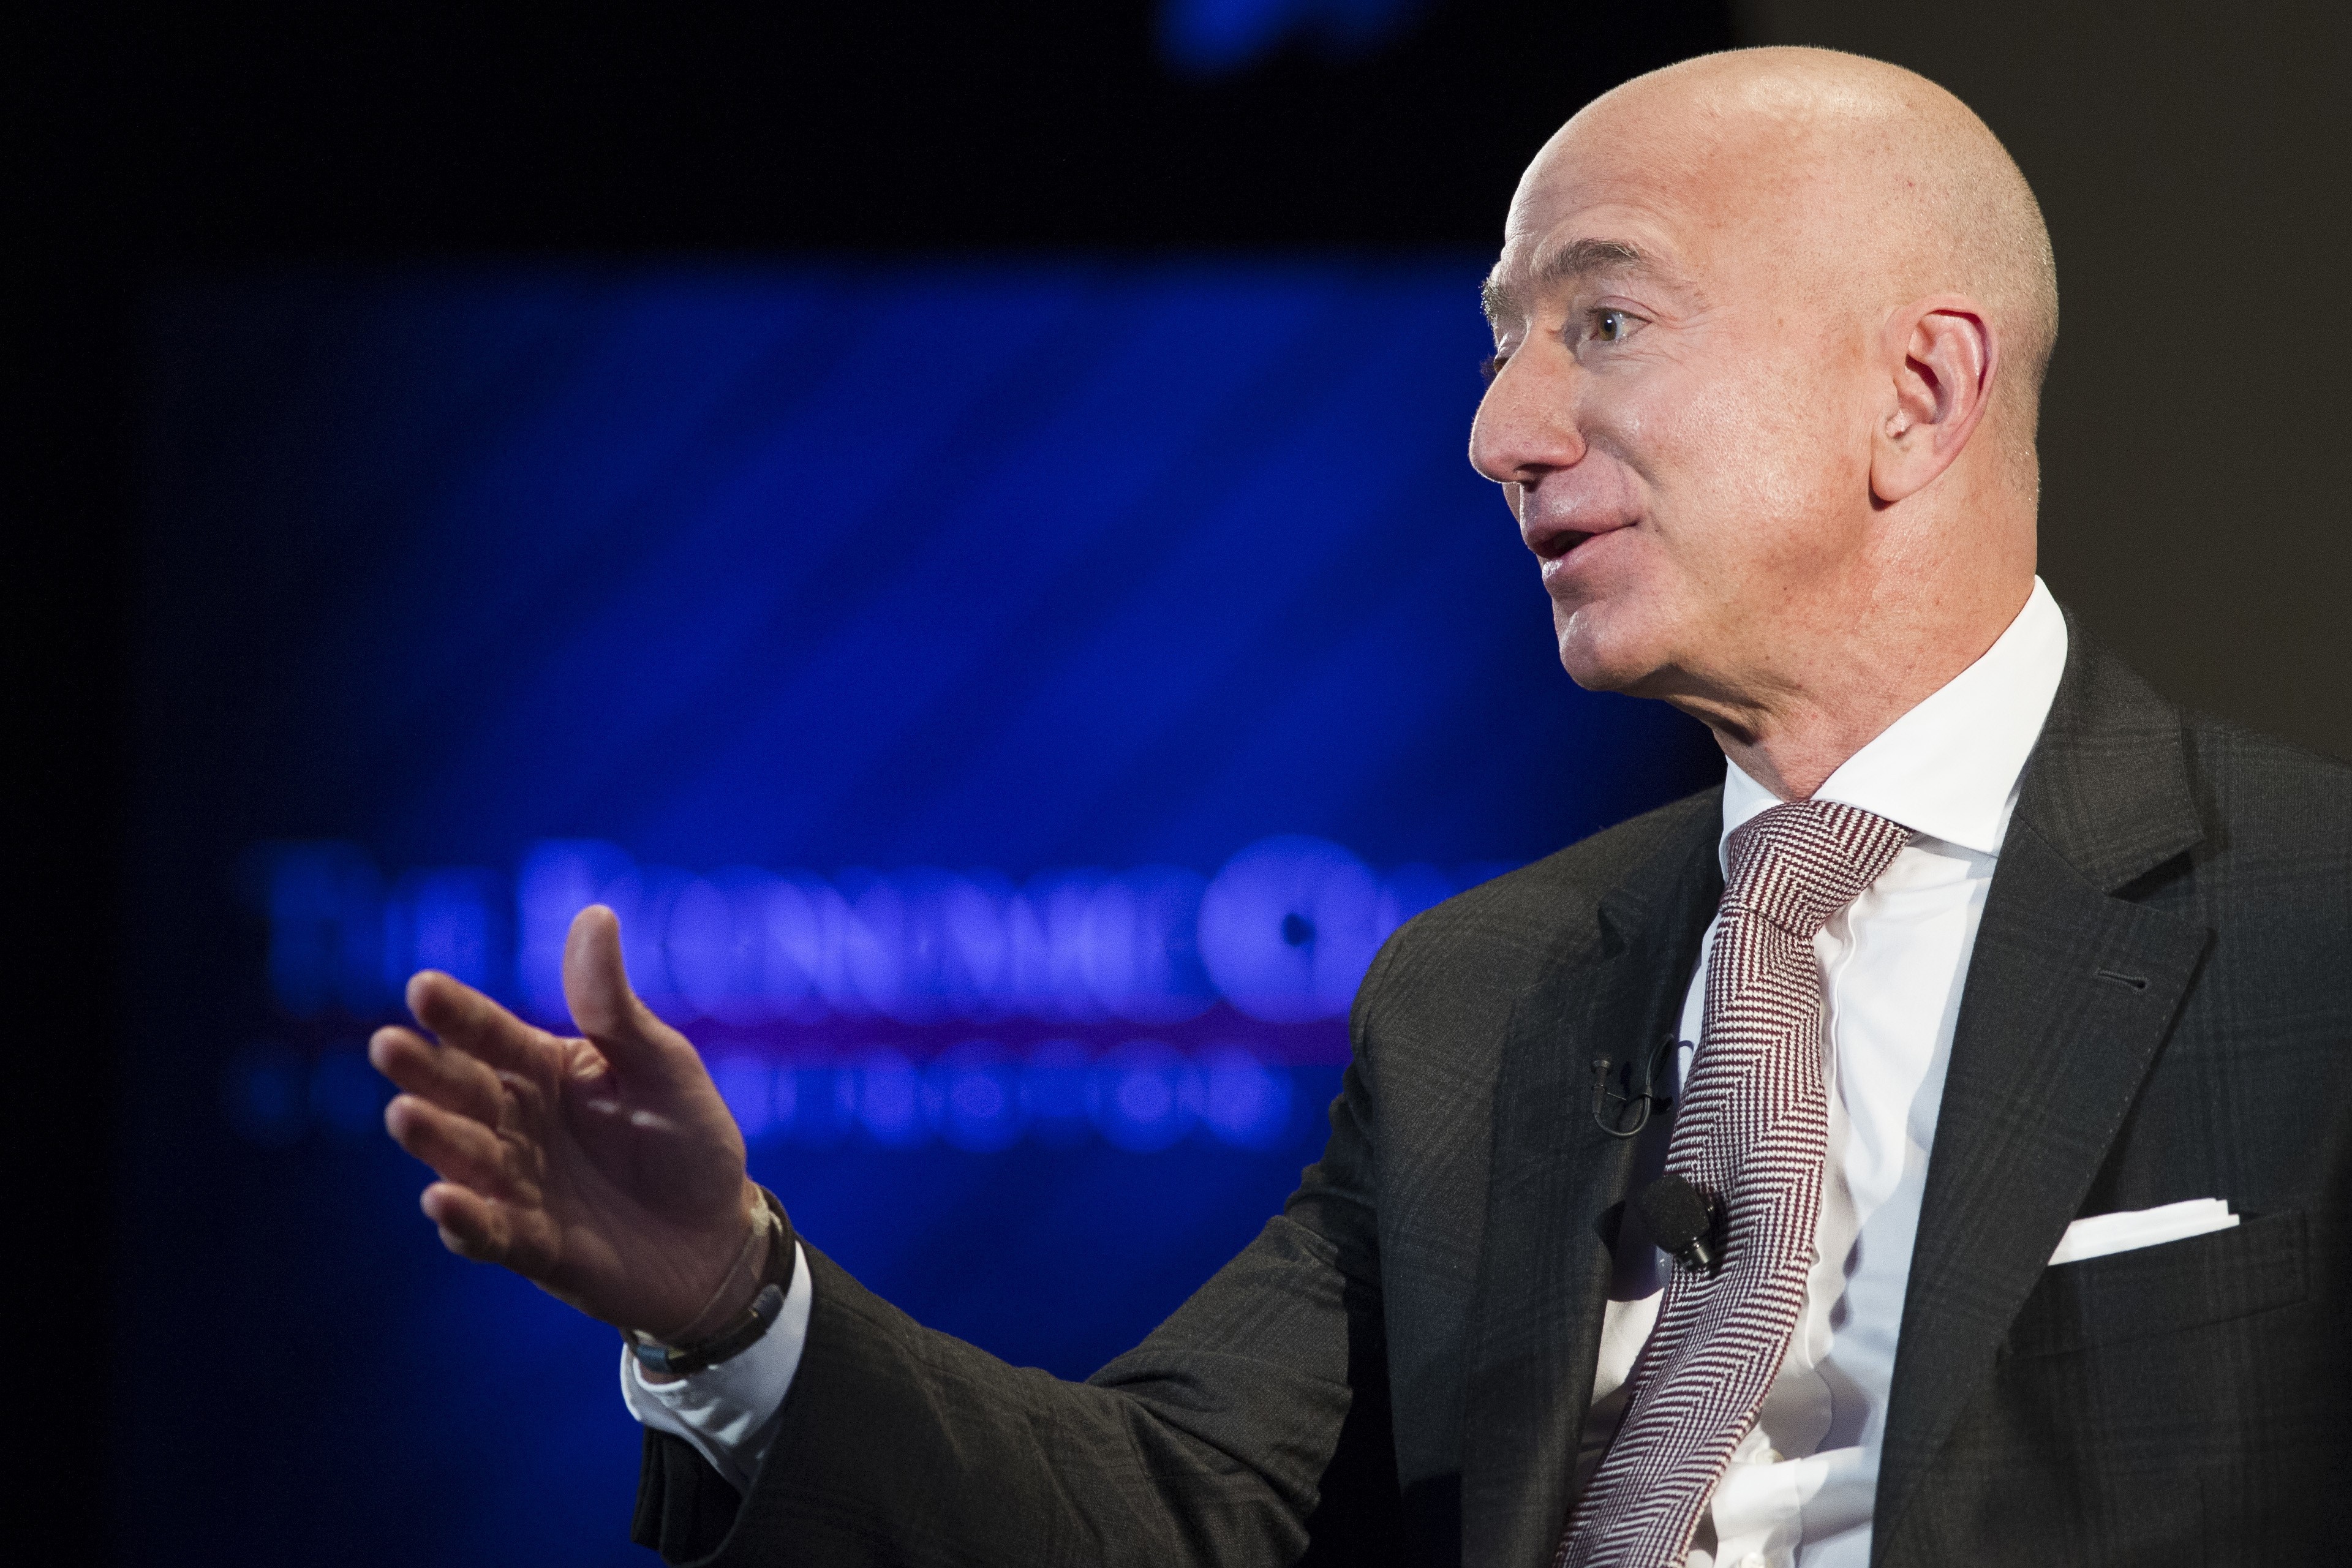 Jeff Bezos, Amazon founder and CEO, has led Amazon to become a global leader in delivery and movie streaming services. Photo: AP